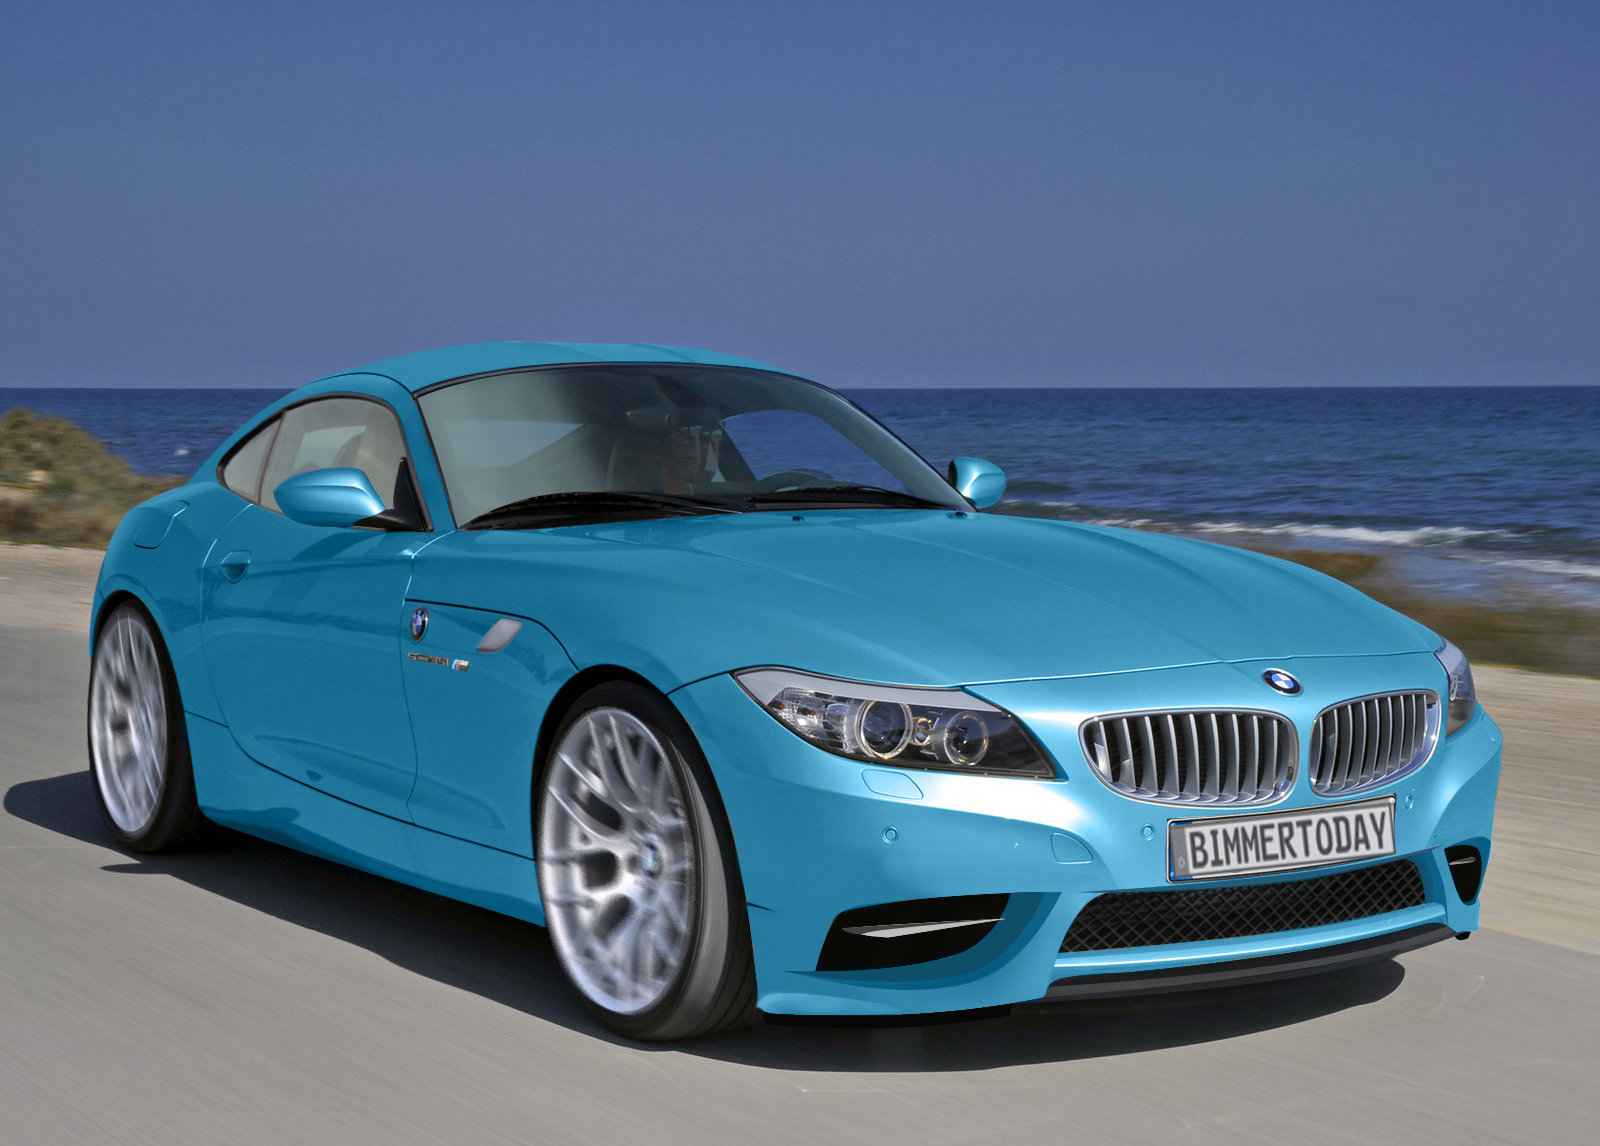 polarizing over the E85 in droptop form â€“ then how could an E89 coupe